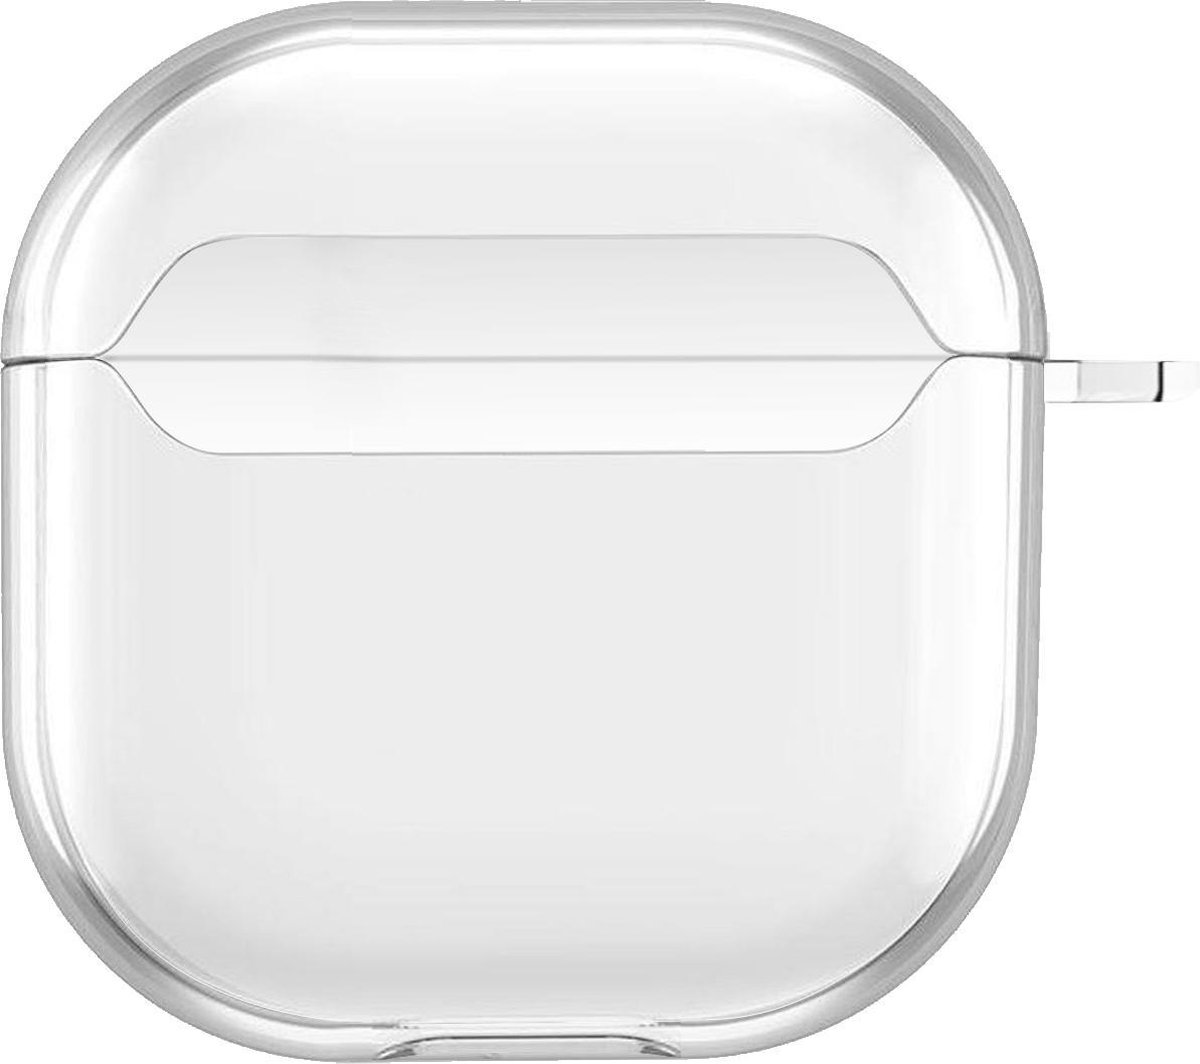 Apple AirPods case - Transparant